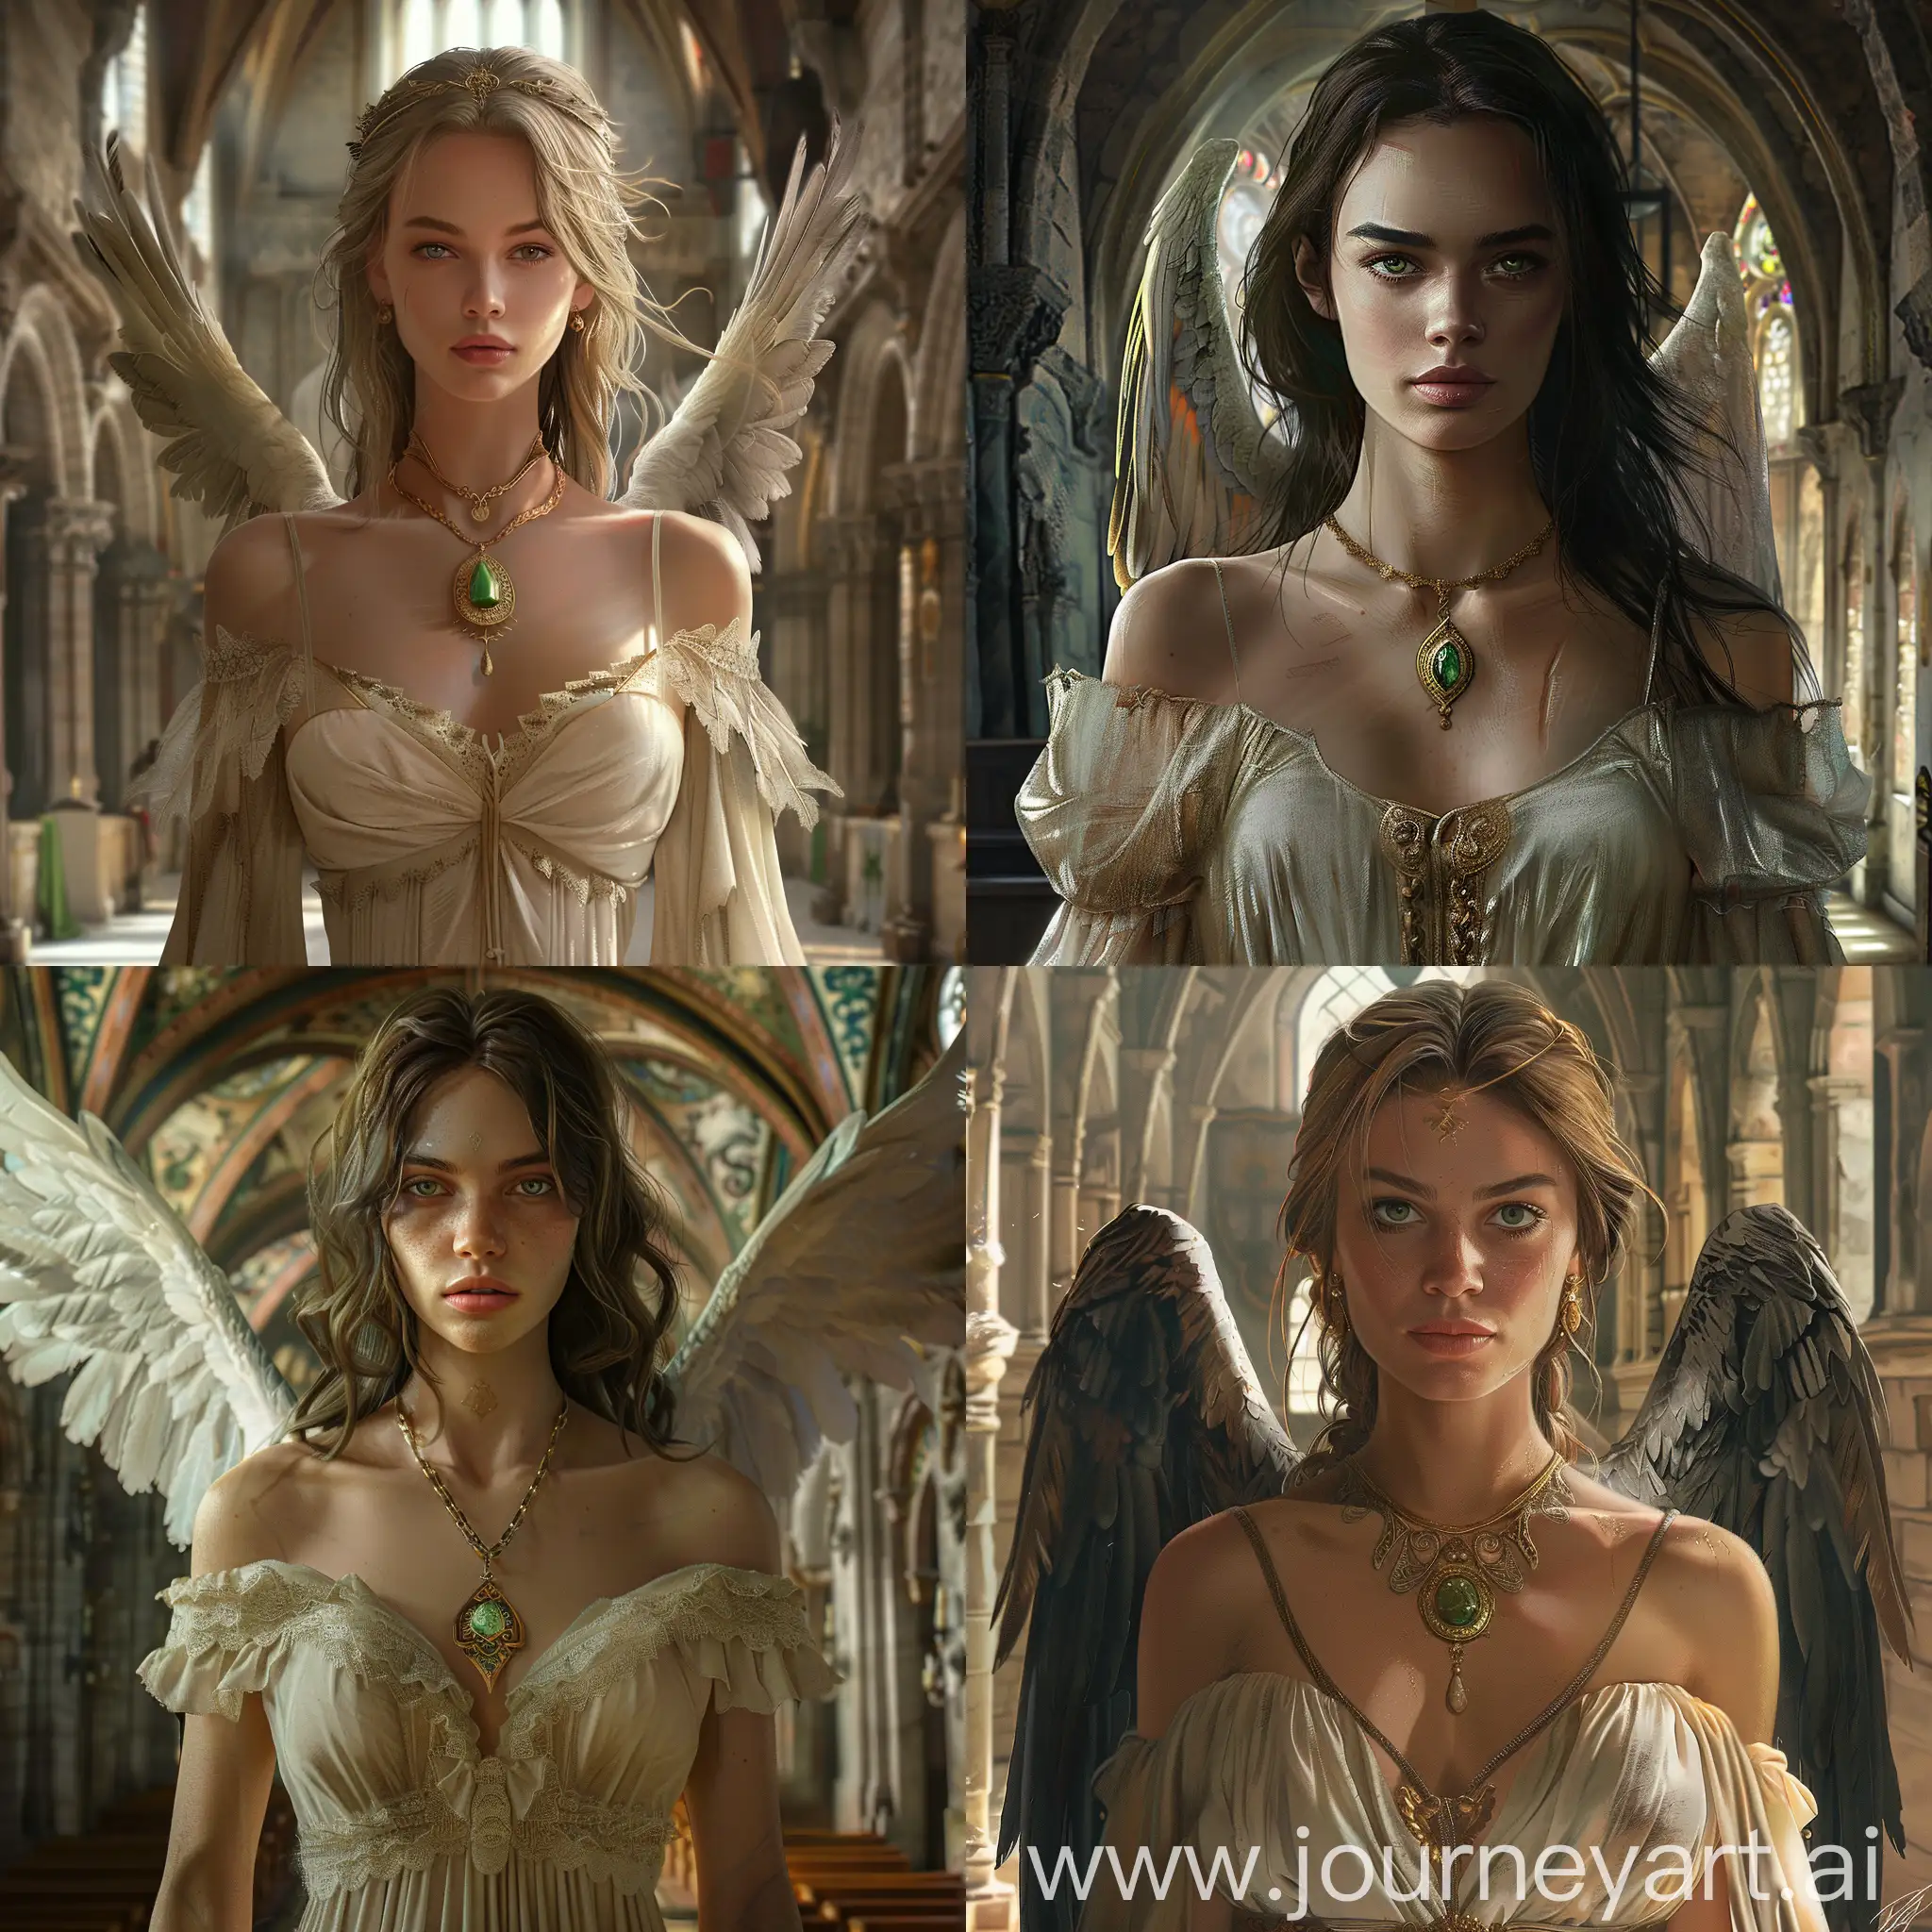 representative of a magical race: a woman in a light beige dress with bare shoulders, a gold pendant with a bright magical crystal around her neck, a woman with a pale face, eagle-like wings growing from her back, green eyes, long shoulder-length hair background: interior of an old monastery v6, very realistic, concept art